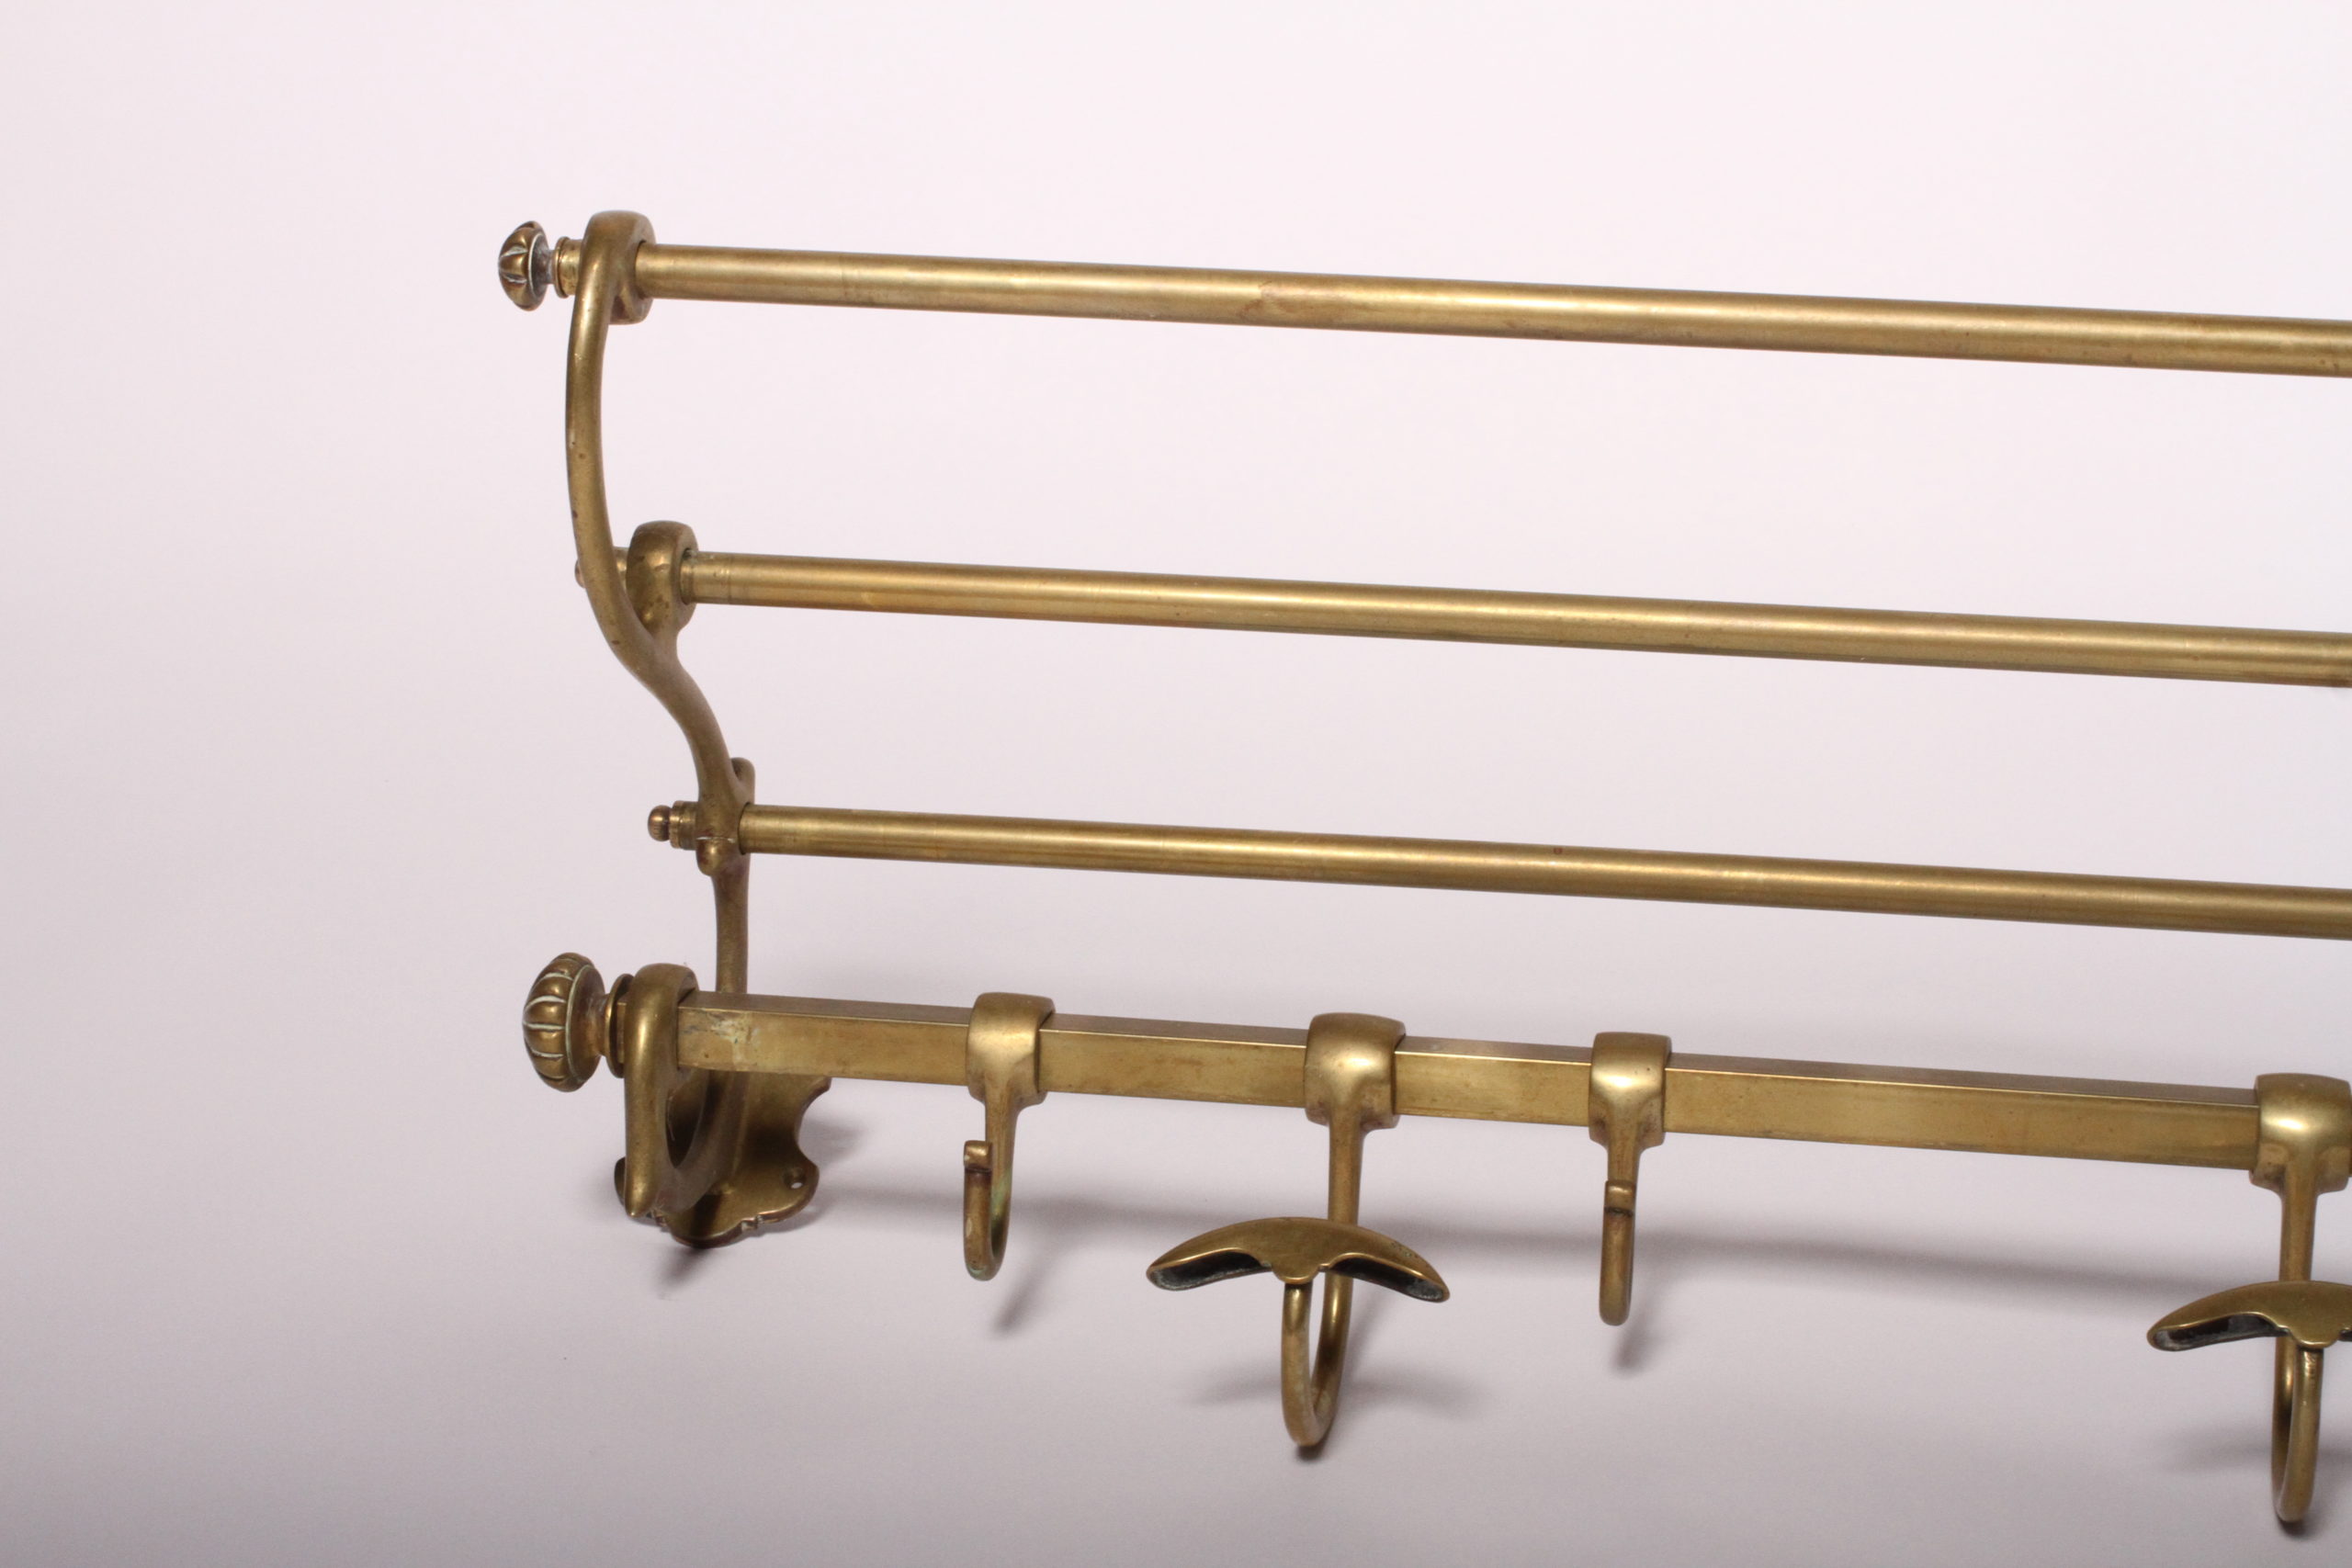 Wick Design 1900's Vintage Brass Wall Mounted Train Luggage and Coat Rack -  Wick Design